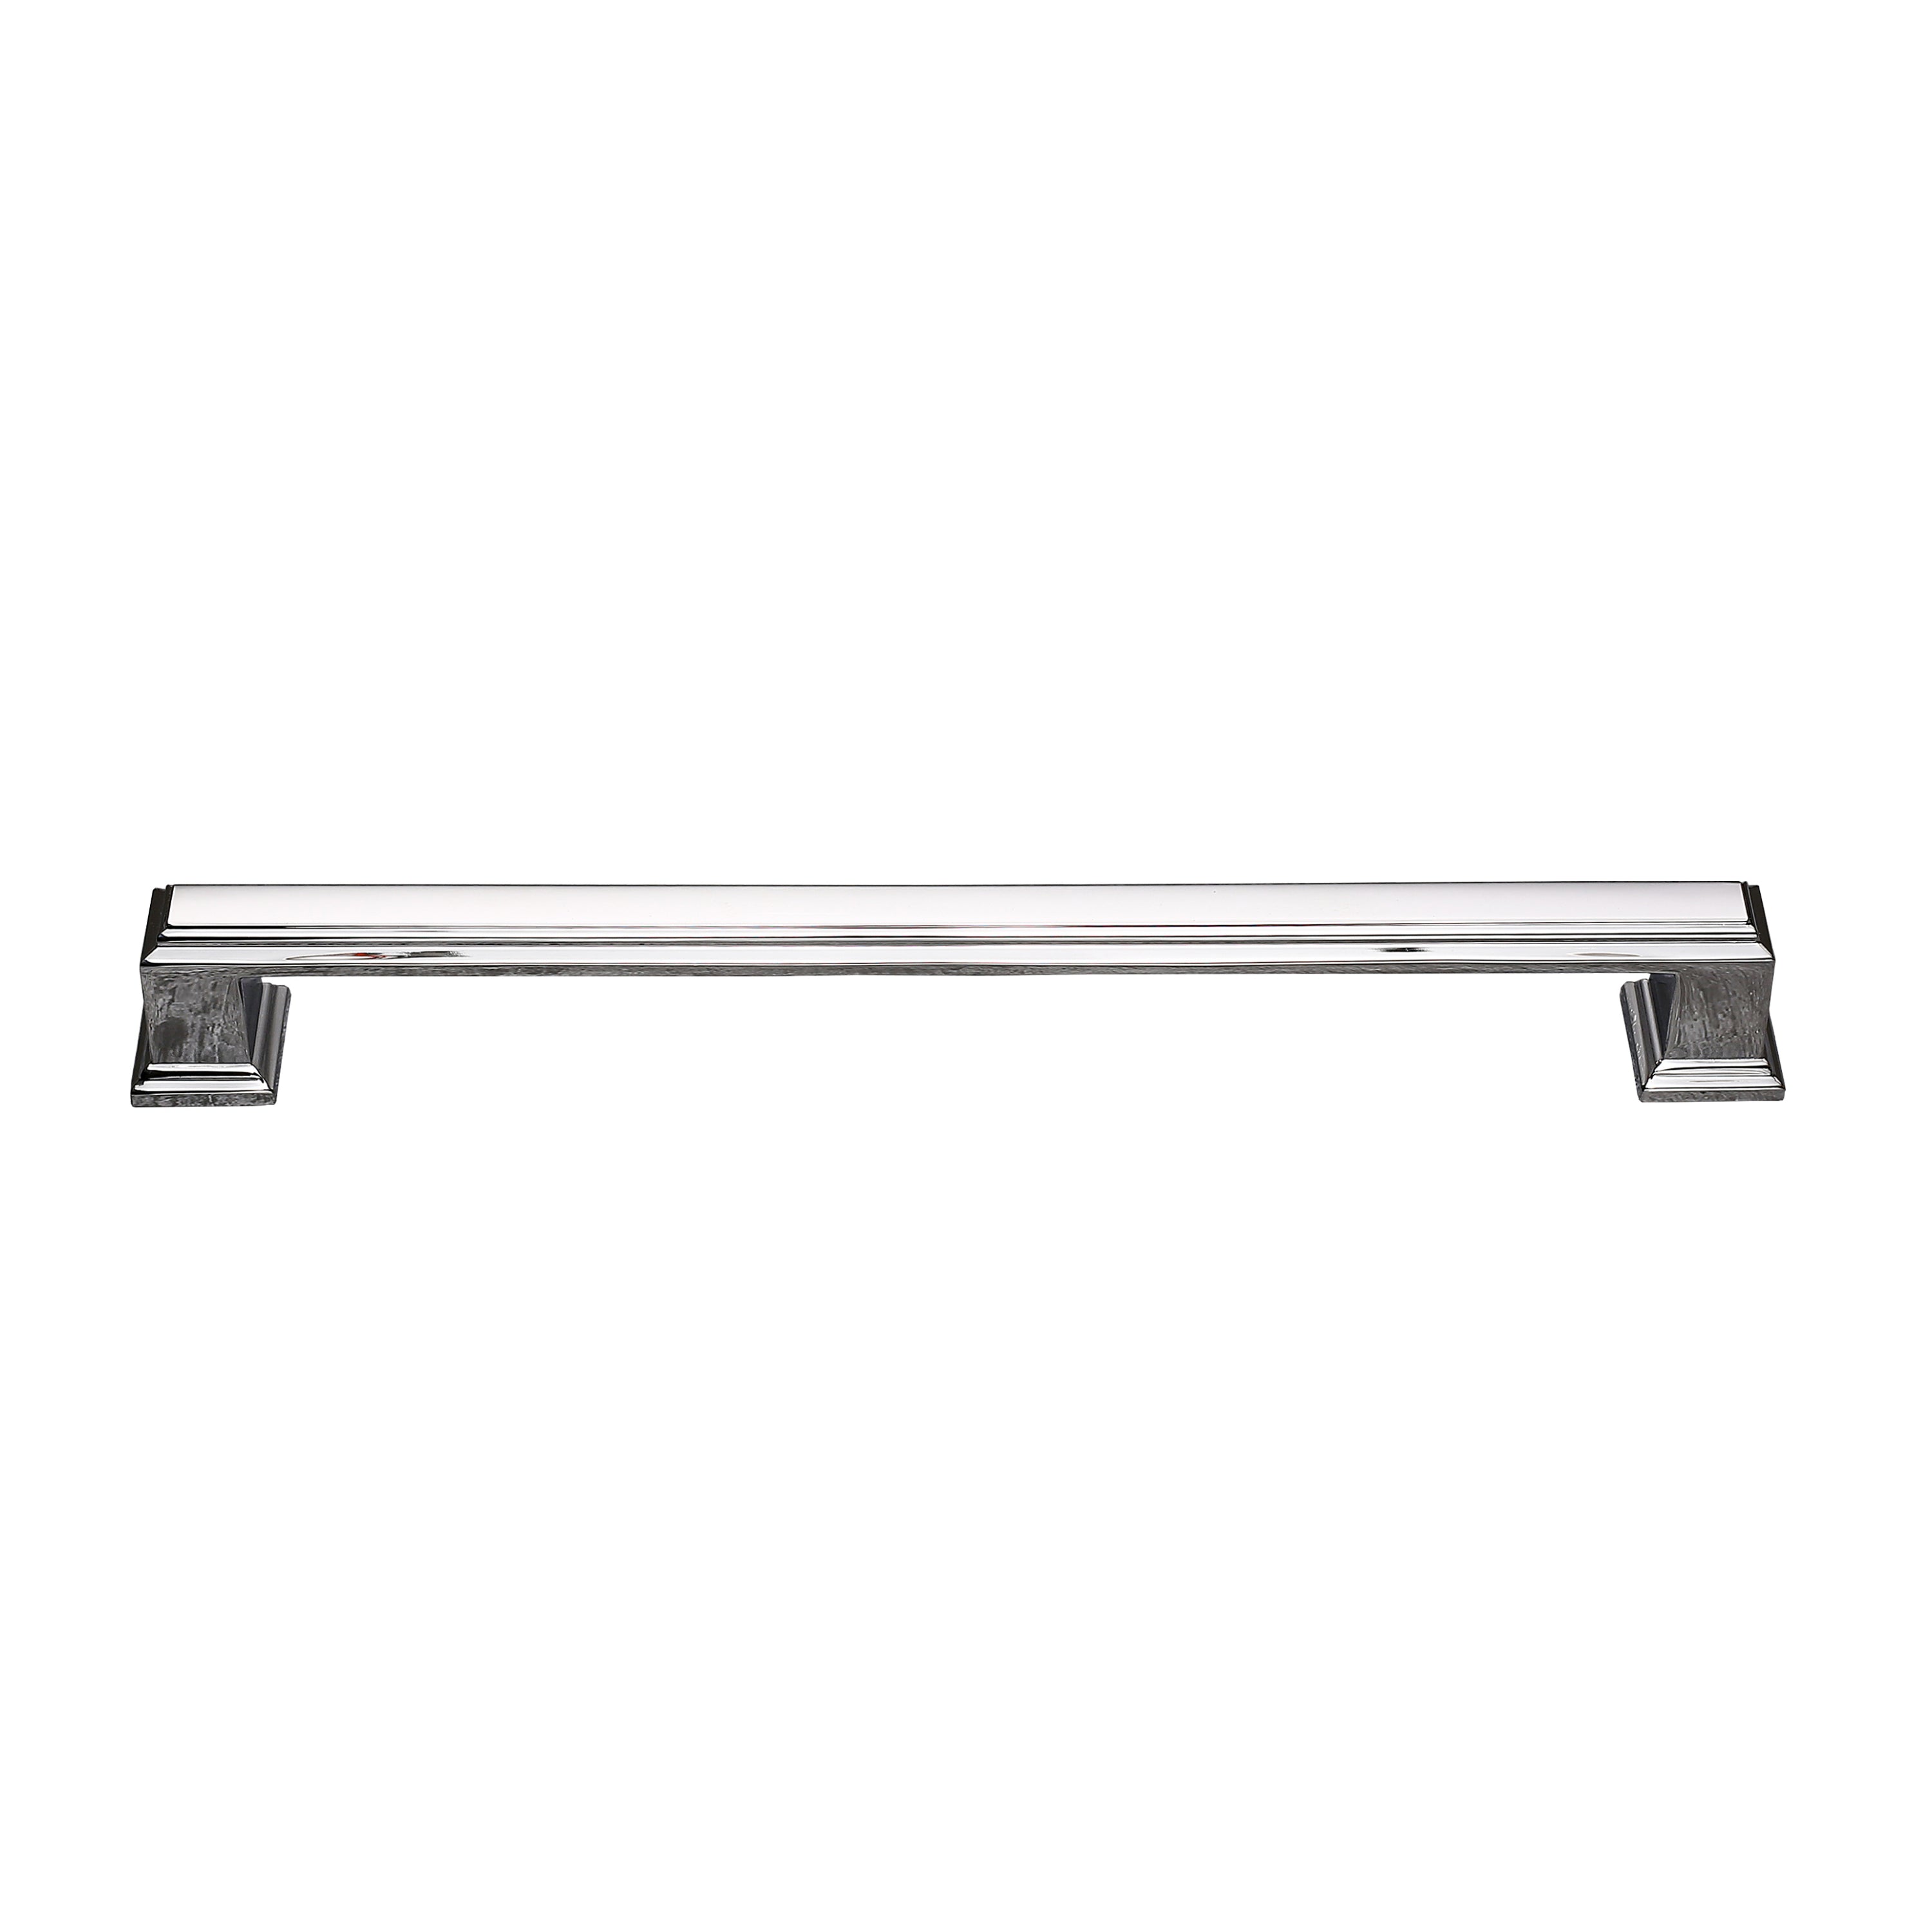 Sapphire Octa Elegance: 7-1/2 in. Contemporary Cabinet Handle Suite (Set of 5) -  Pro-Edge HD